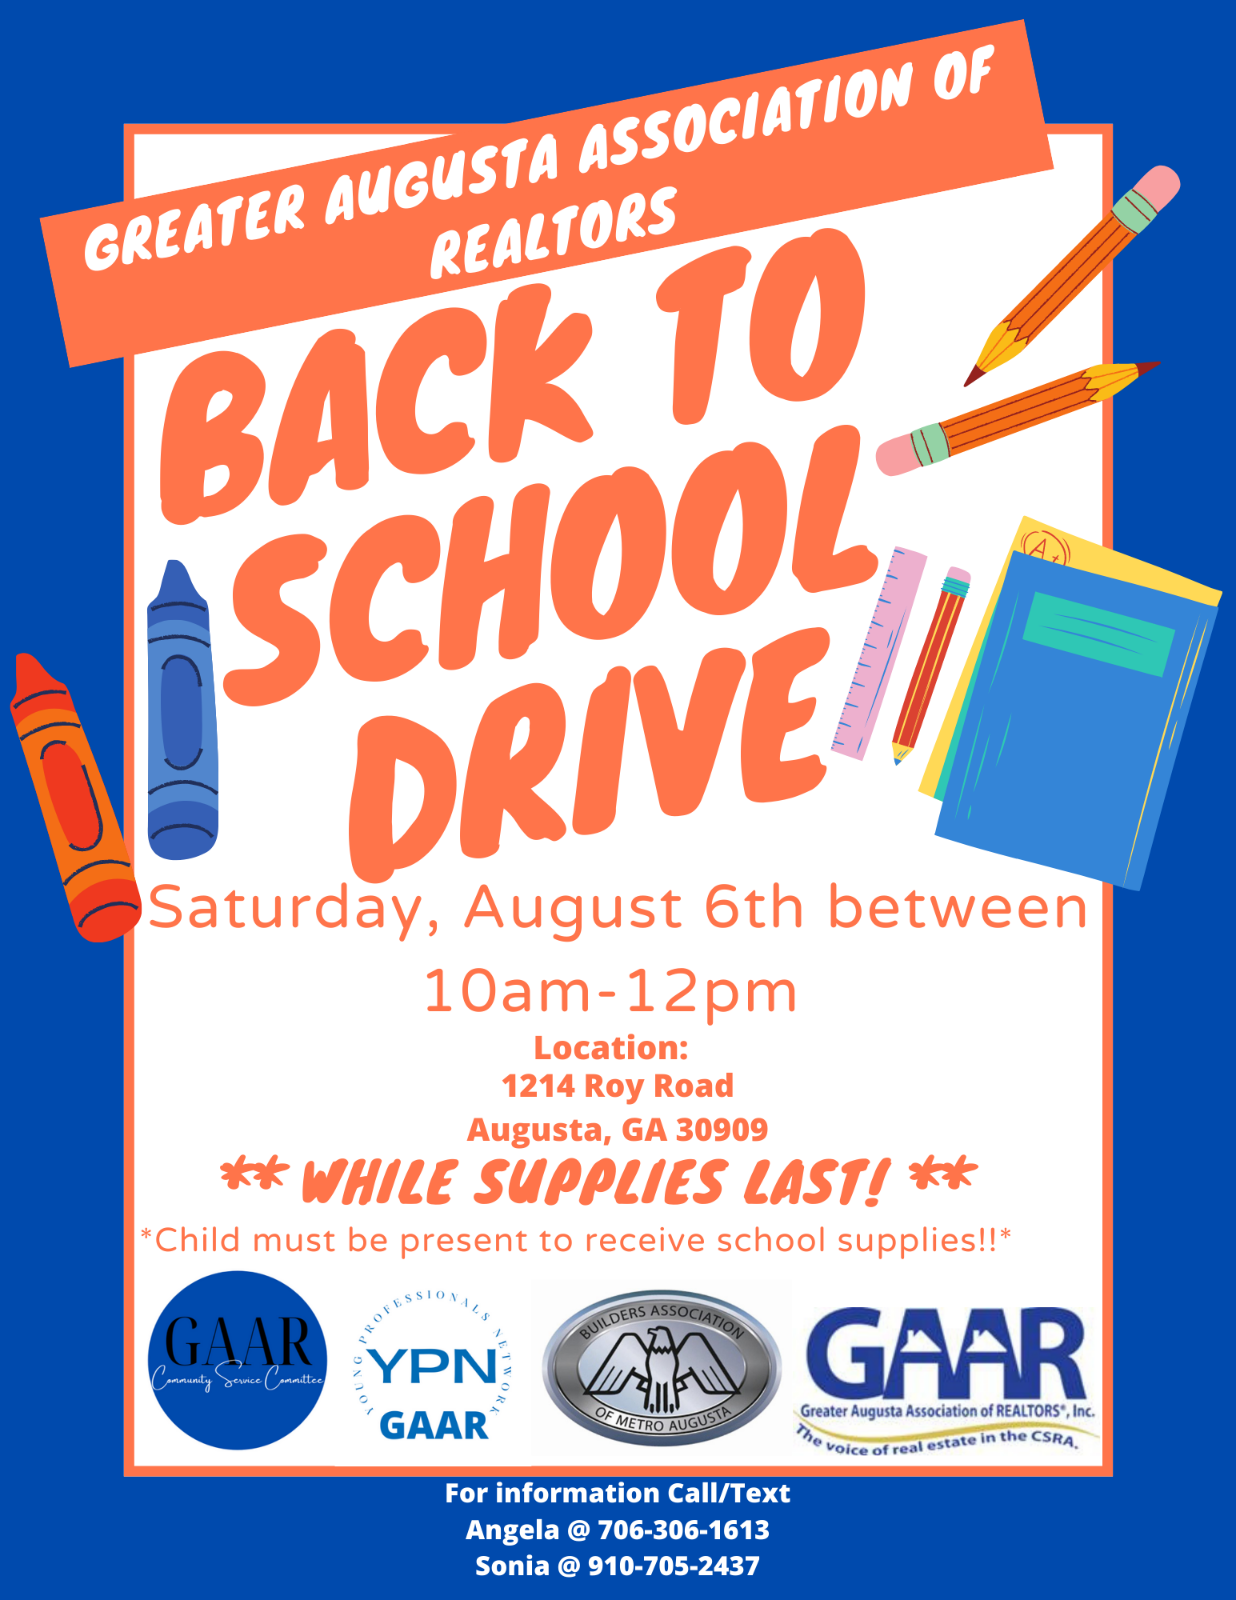 Greater Augusta Association of Realtors back-to-school drive 2022